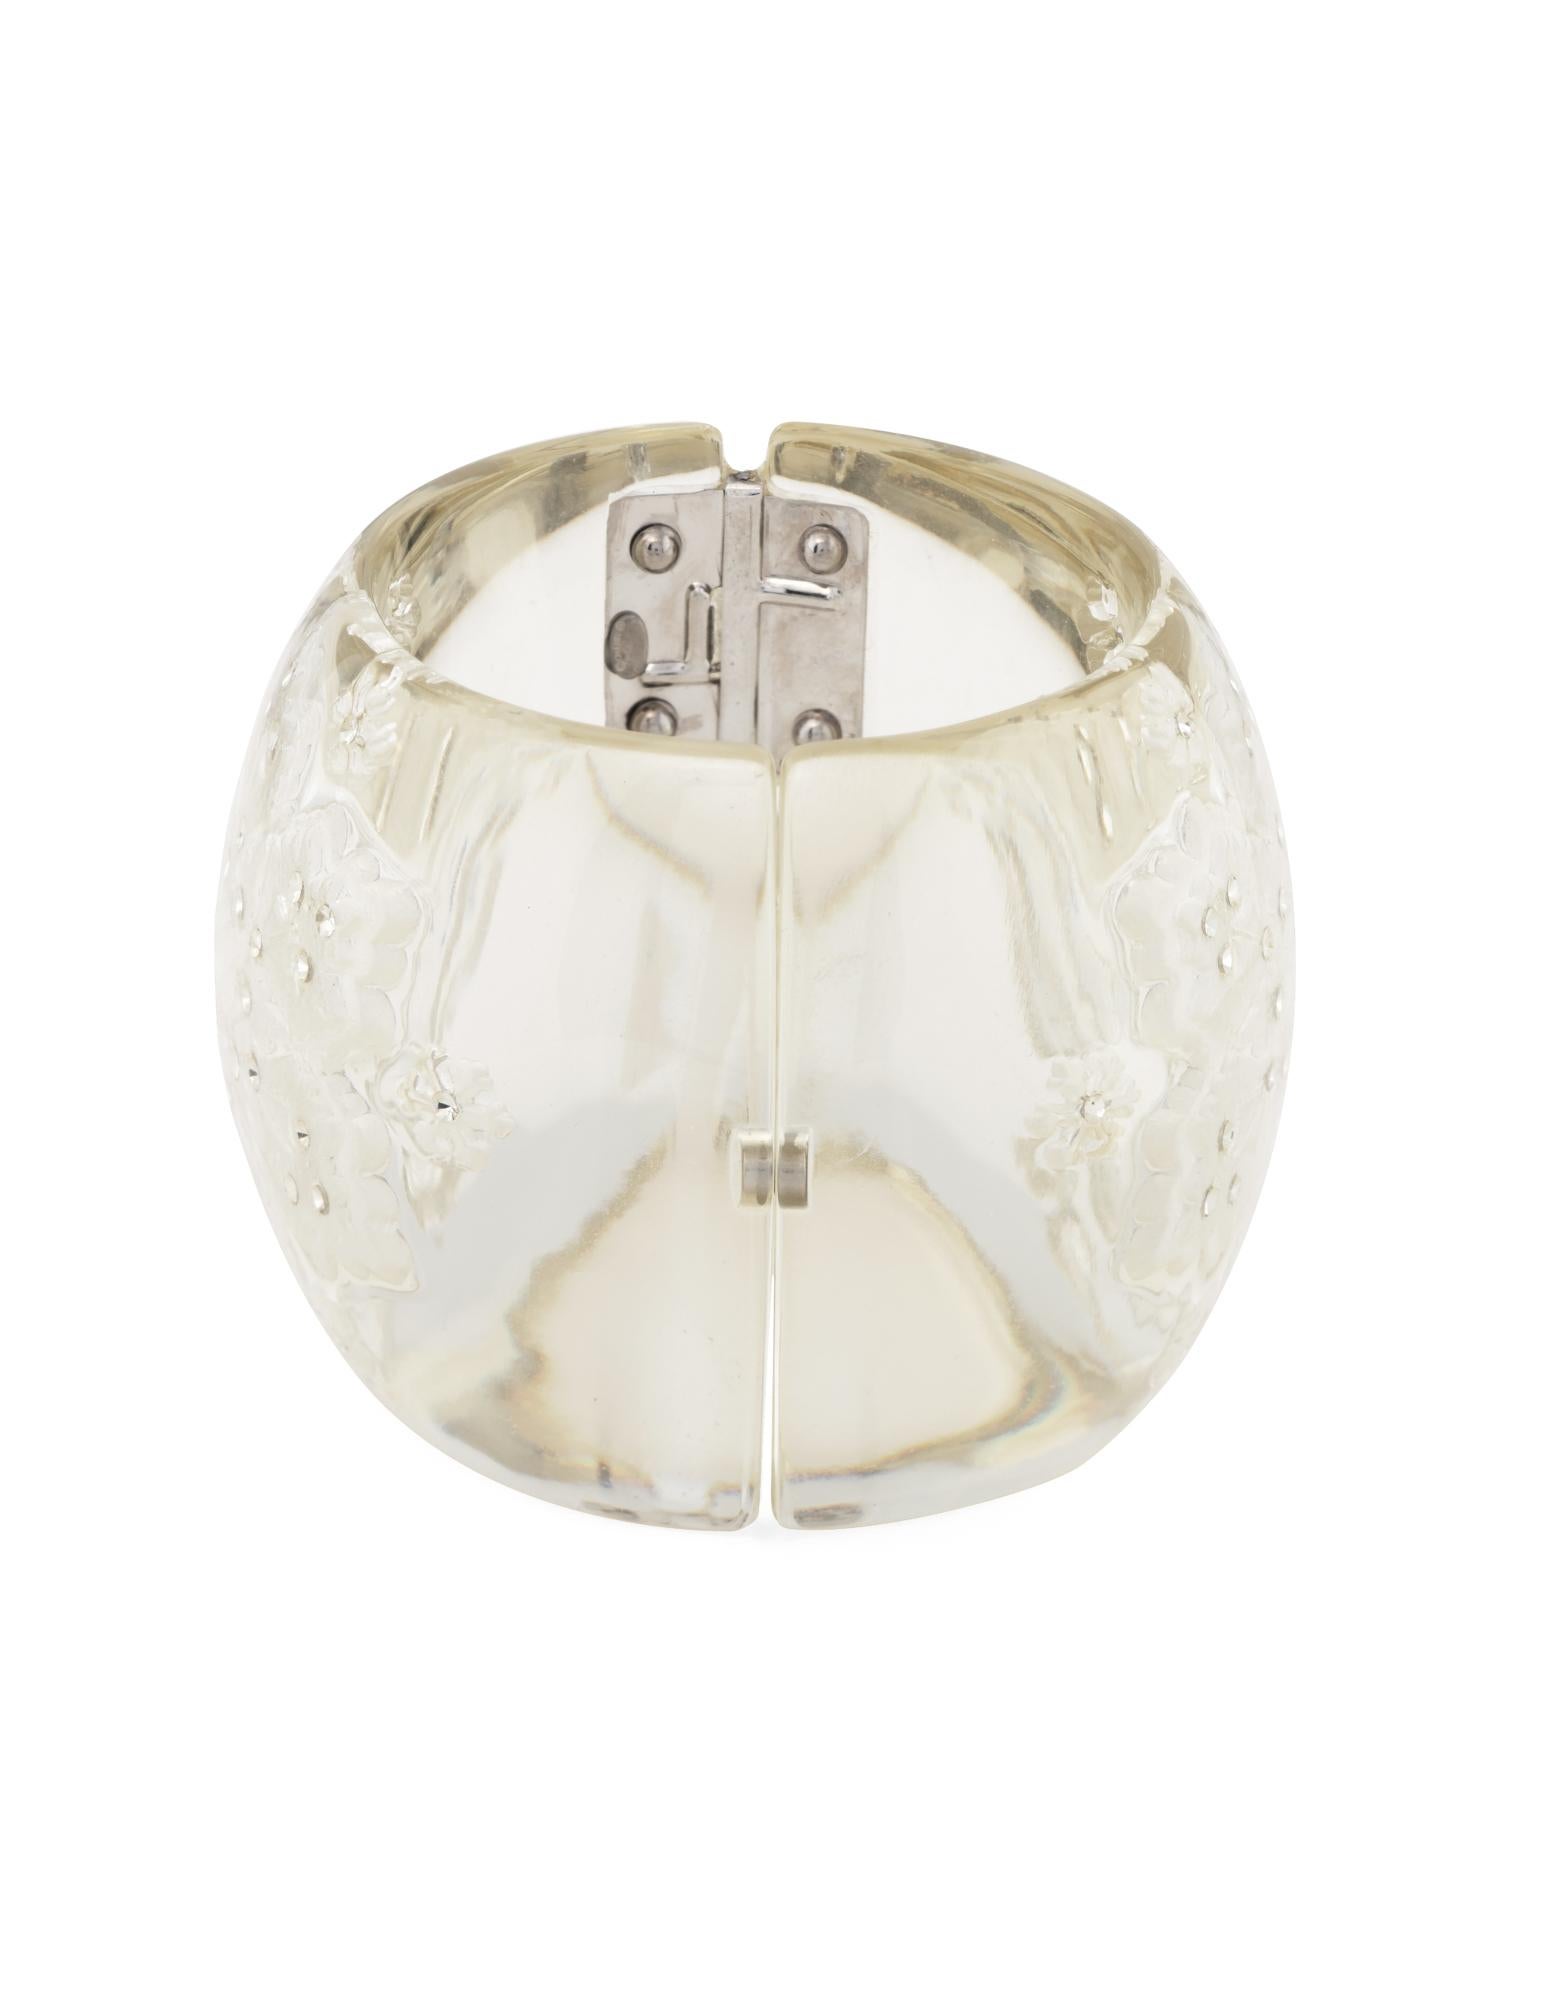 Vintage Chanel Lucite snowflake wide cuff (circa 2005). 

The wide 2 inch cuff features a snowflake design set with rhinestone crystals. The cuff is set with a secure double-hinged design to easily slip on and off the wrist. Also included is a